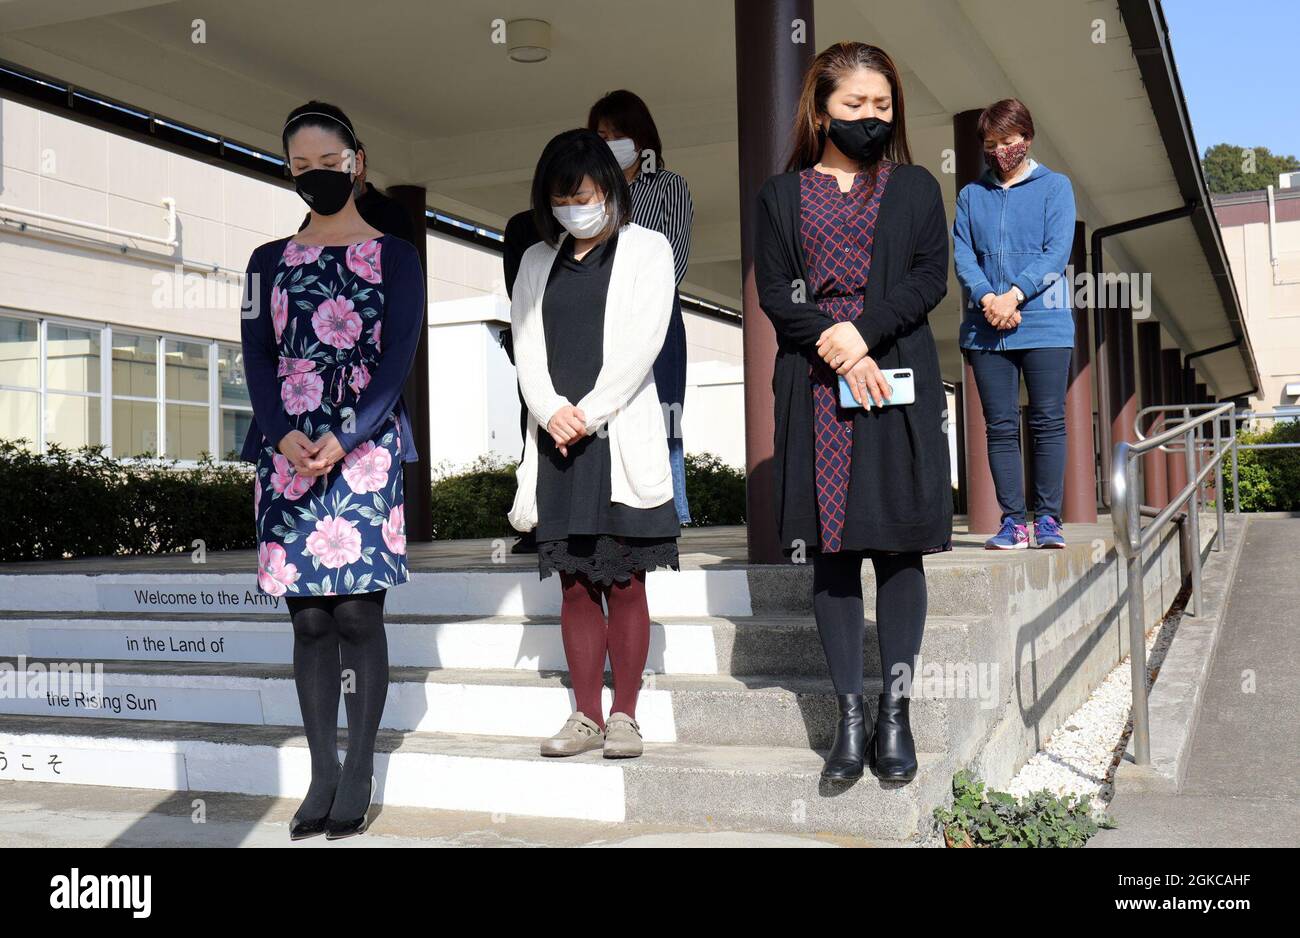 U.S. Army Garrison Japan employees stand outside the headquarters building at Camp Zama, Japan, at 2:46 p.m. March 11, in commemoration of the magnitude 9.0 earthquake that struck off the eastern coast of Japan 10 years ago. Stock Photo